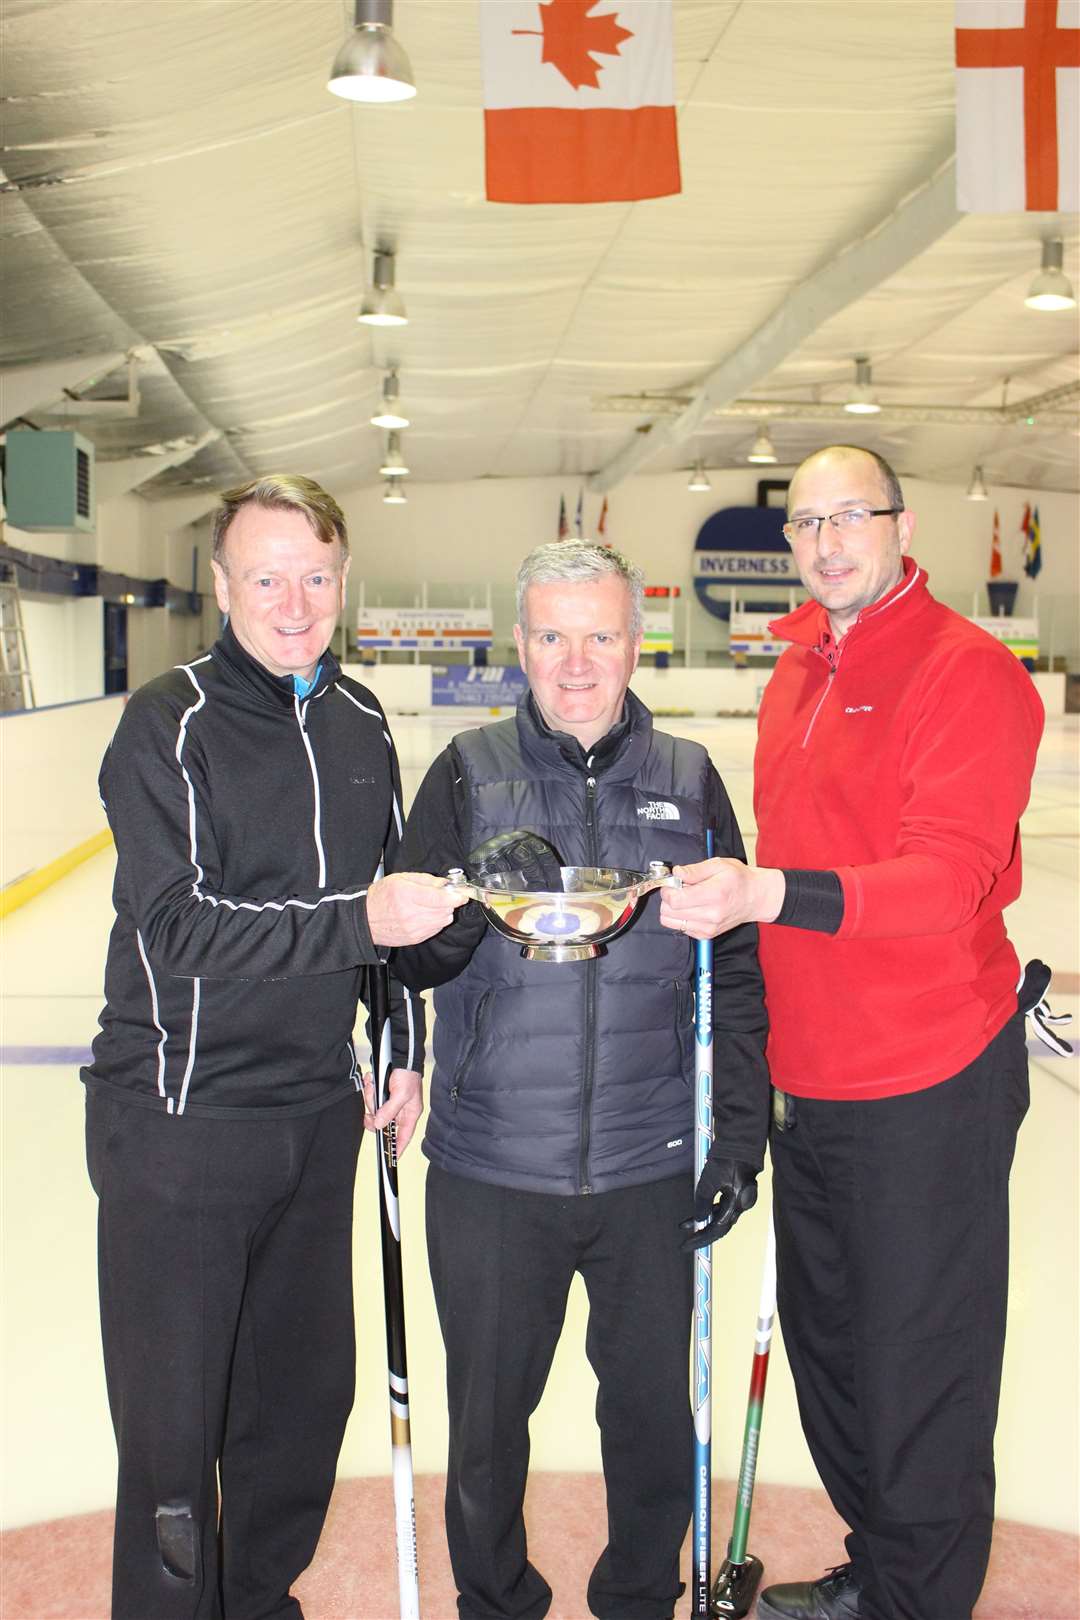 Inverness Super League Division 2 curling winners, The Thomson Rink brothers Brian (left) and Graeme (centre) with third player Gary McAra. Their fourth league winning team player Jim Brown was not at the ice rink.